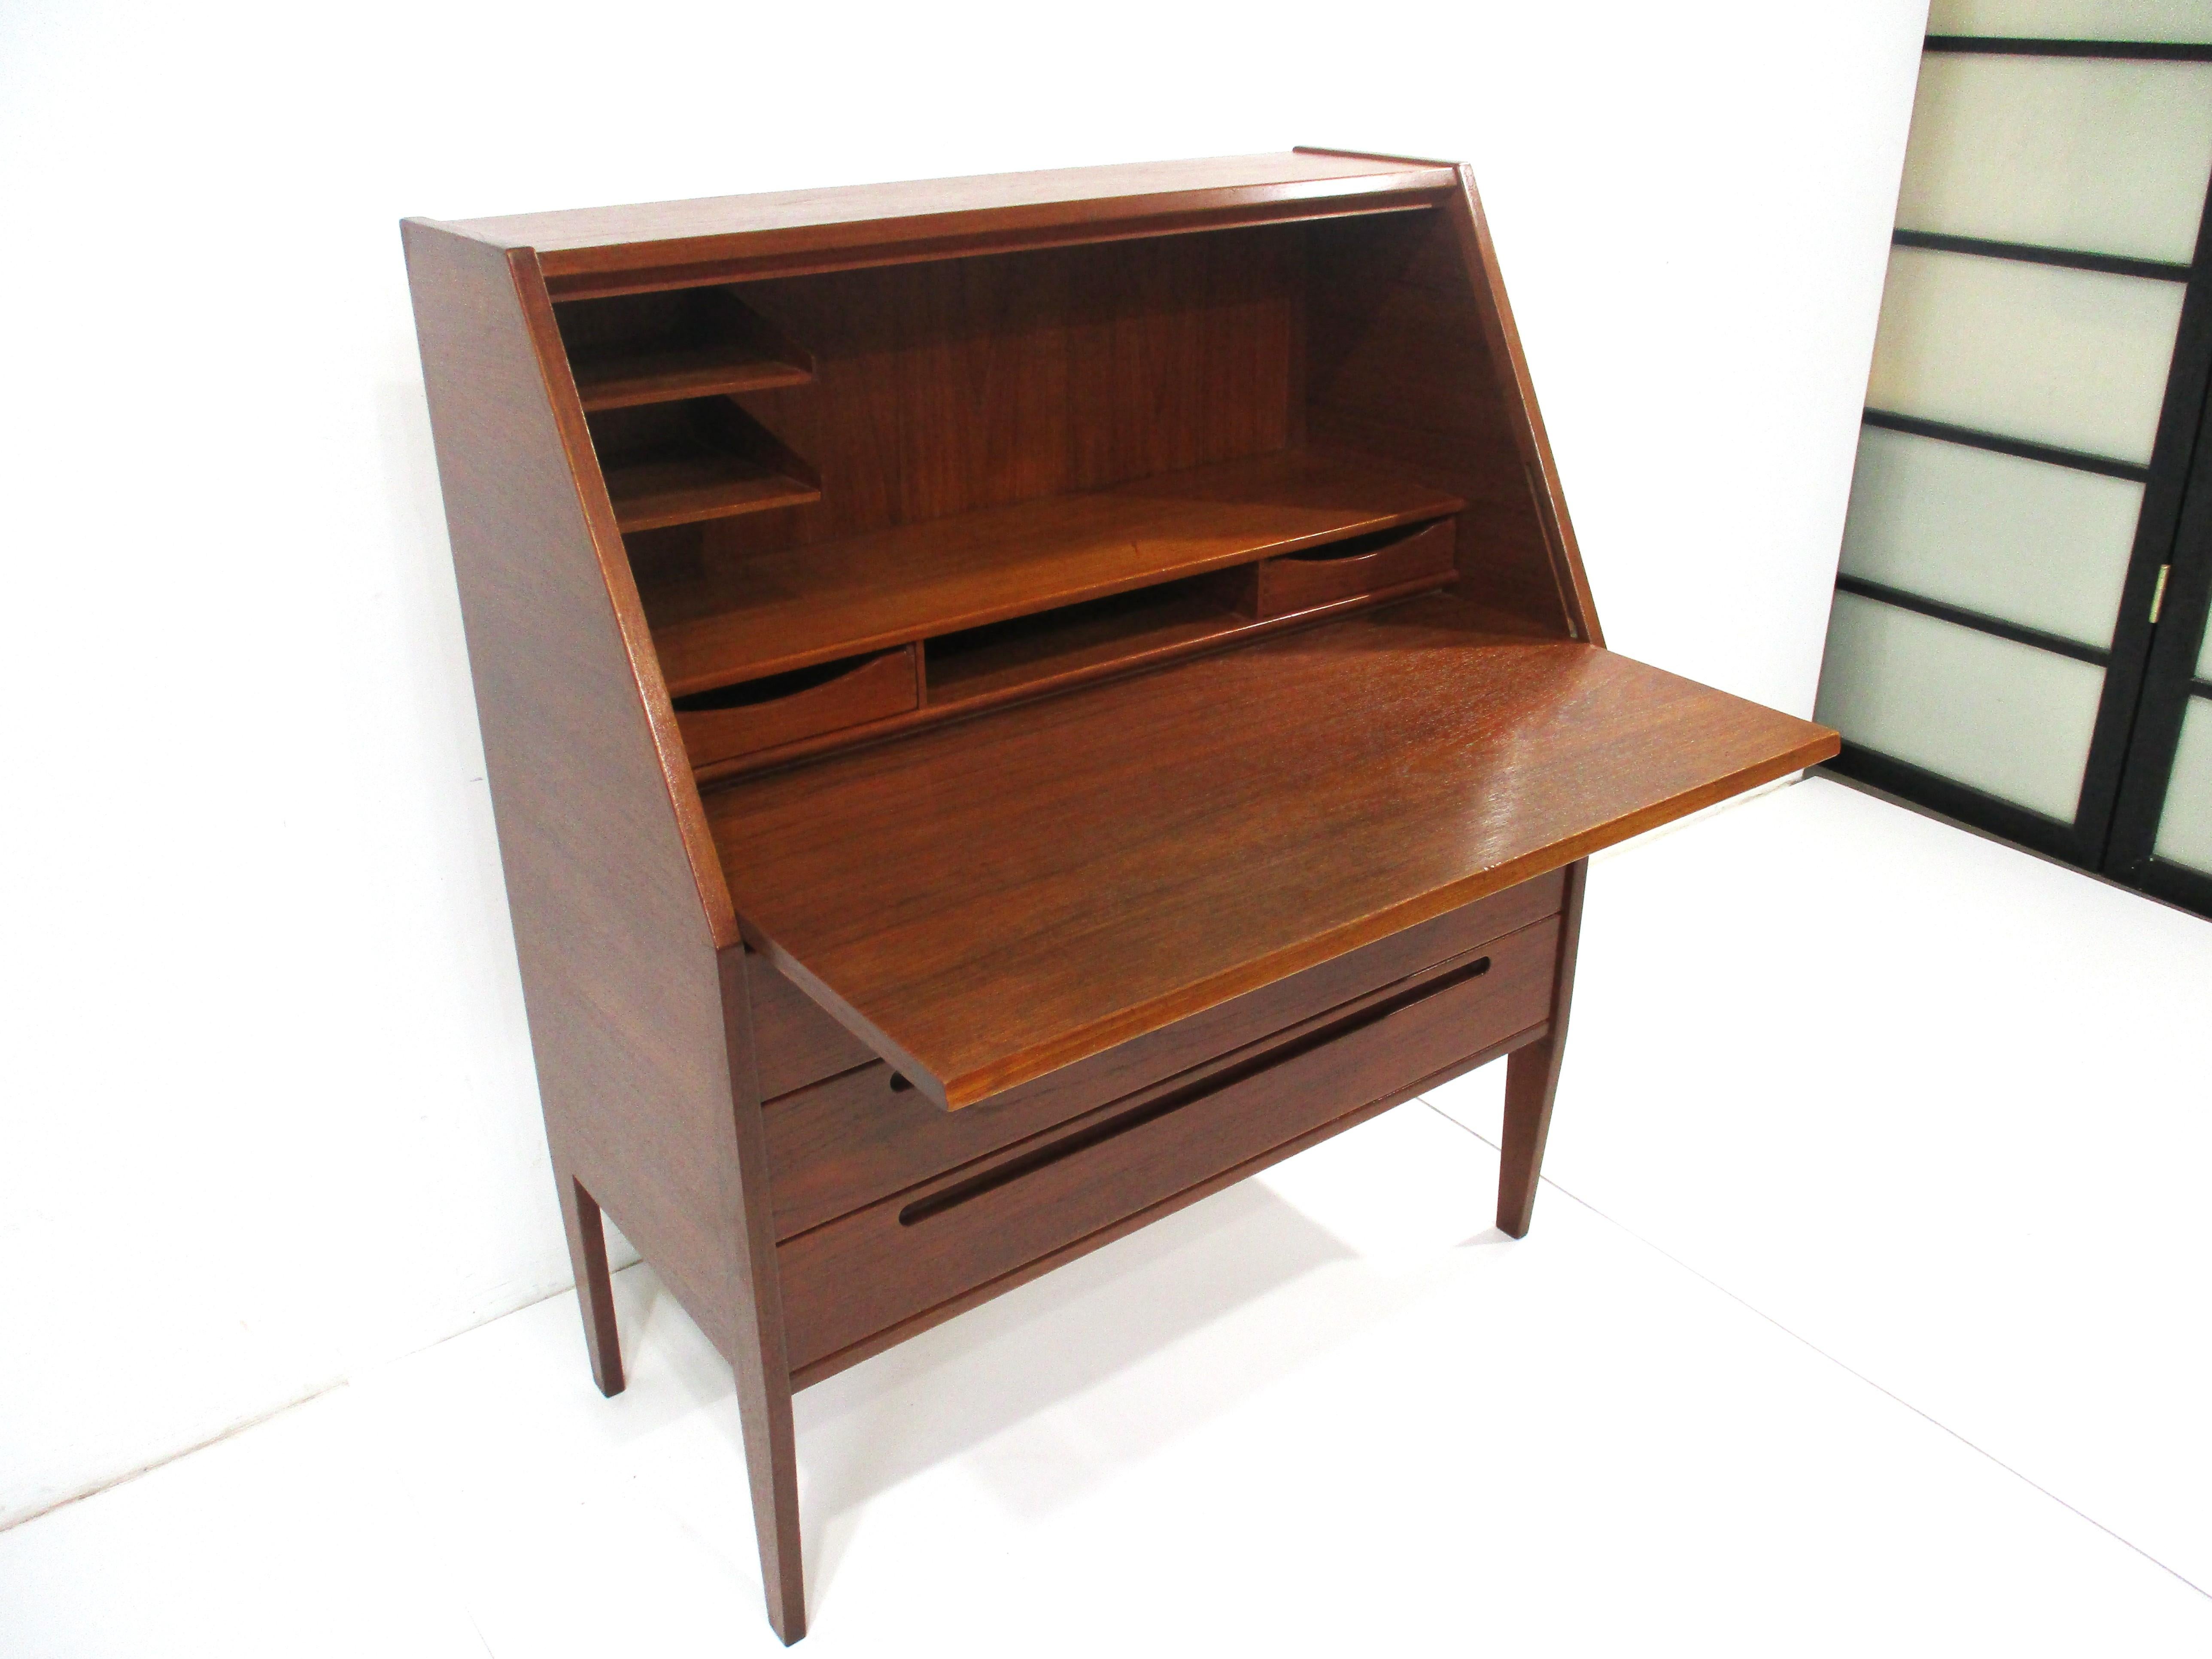 A very well crafted dark teak wood secretaire with pull down door front that slides back to make an adjustable desk top . Inside there is great storage with two floating letter holders , two small drawers an open compartment and shelve . The lower